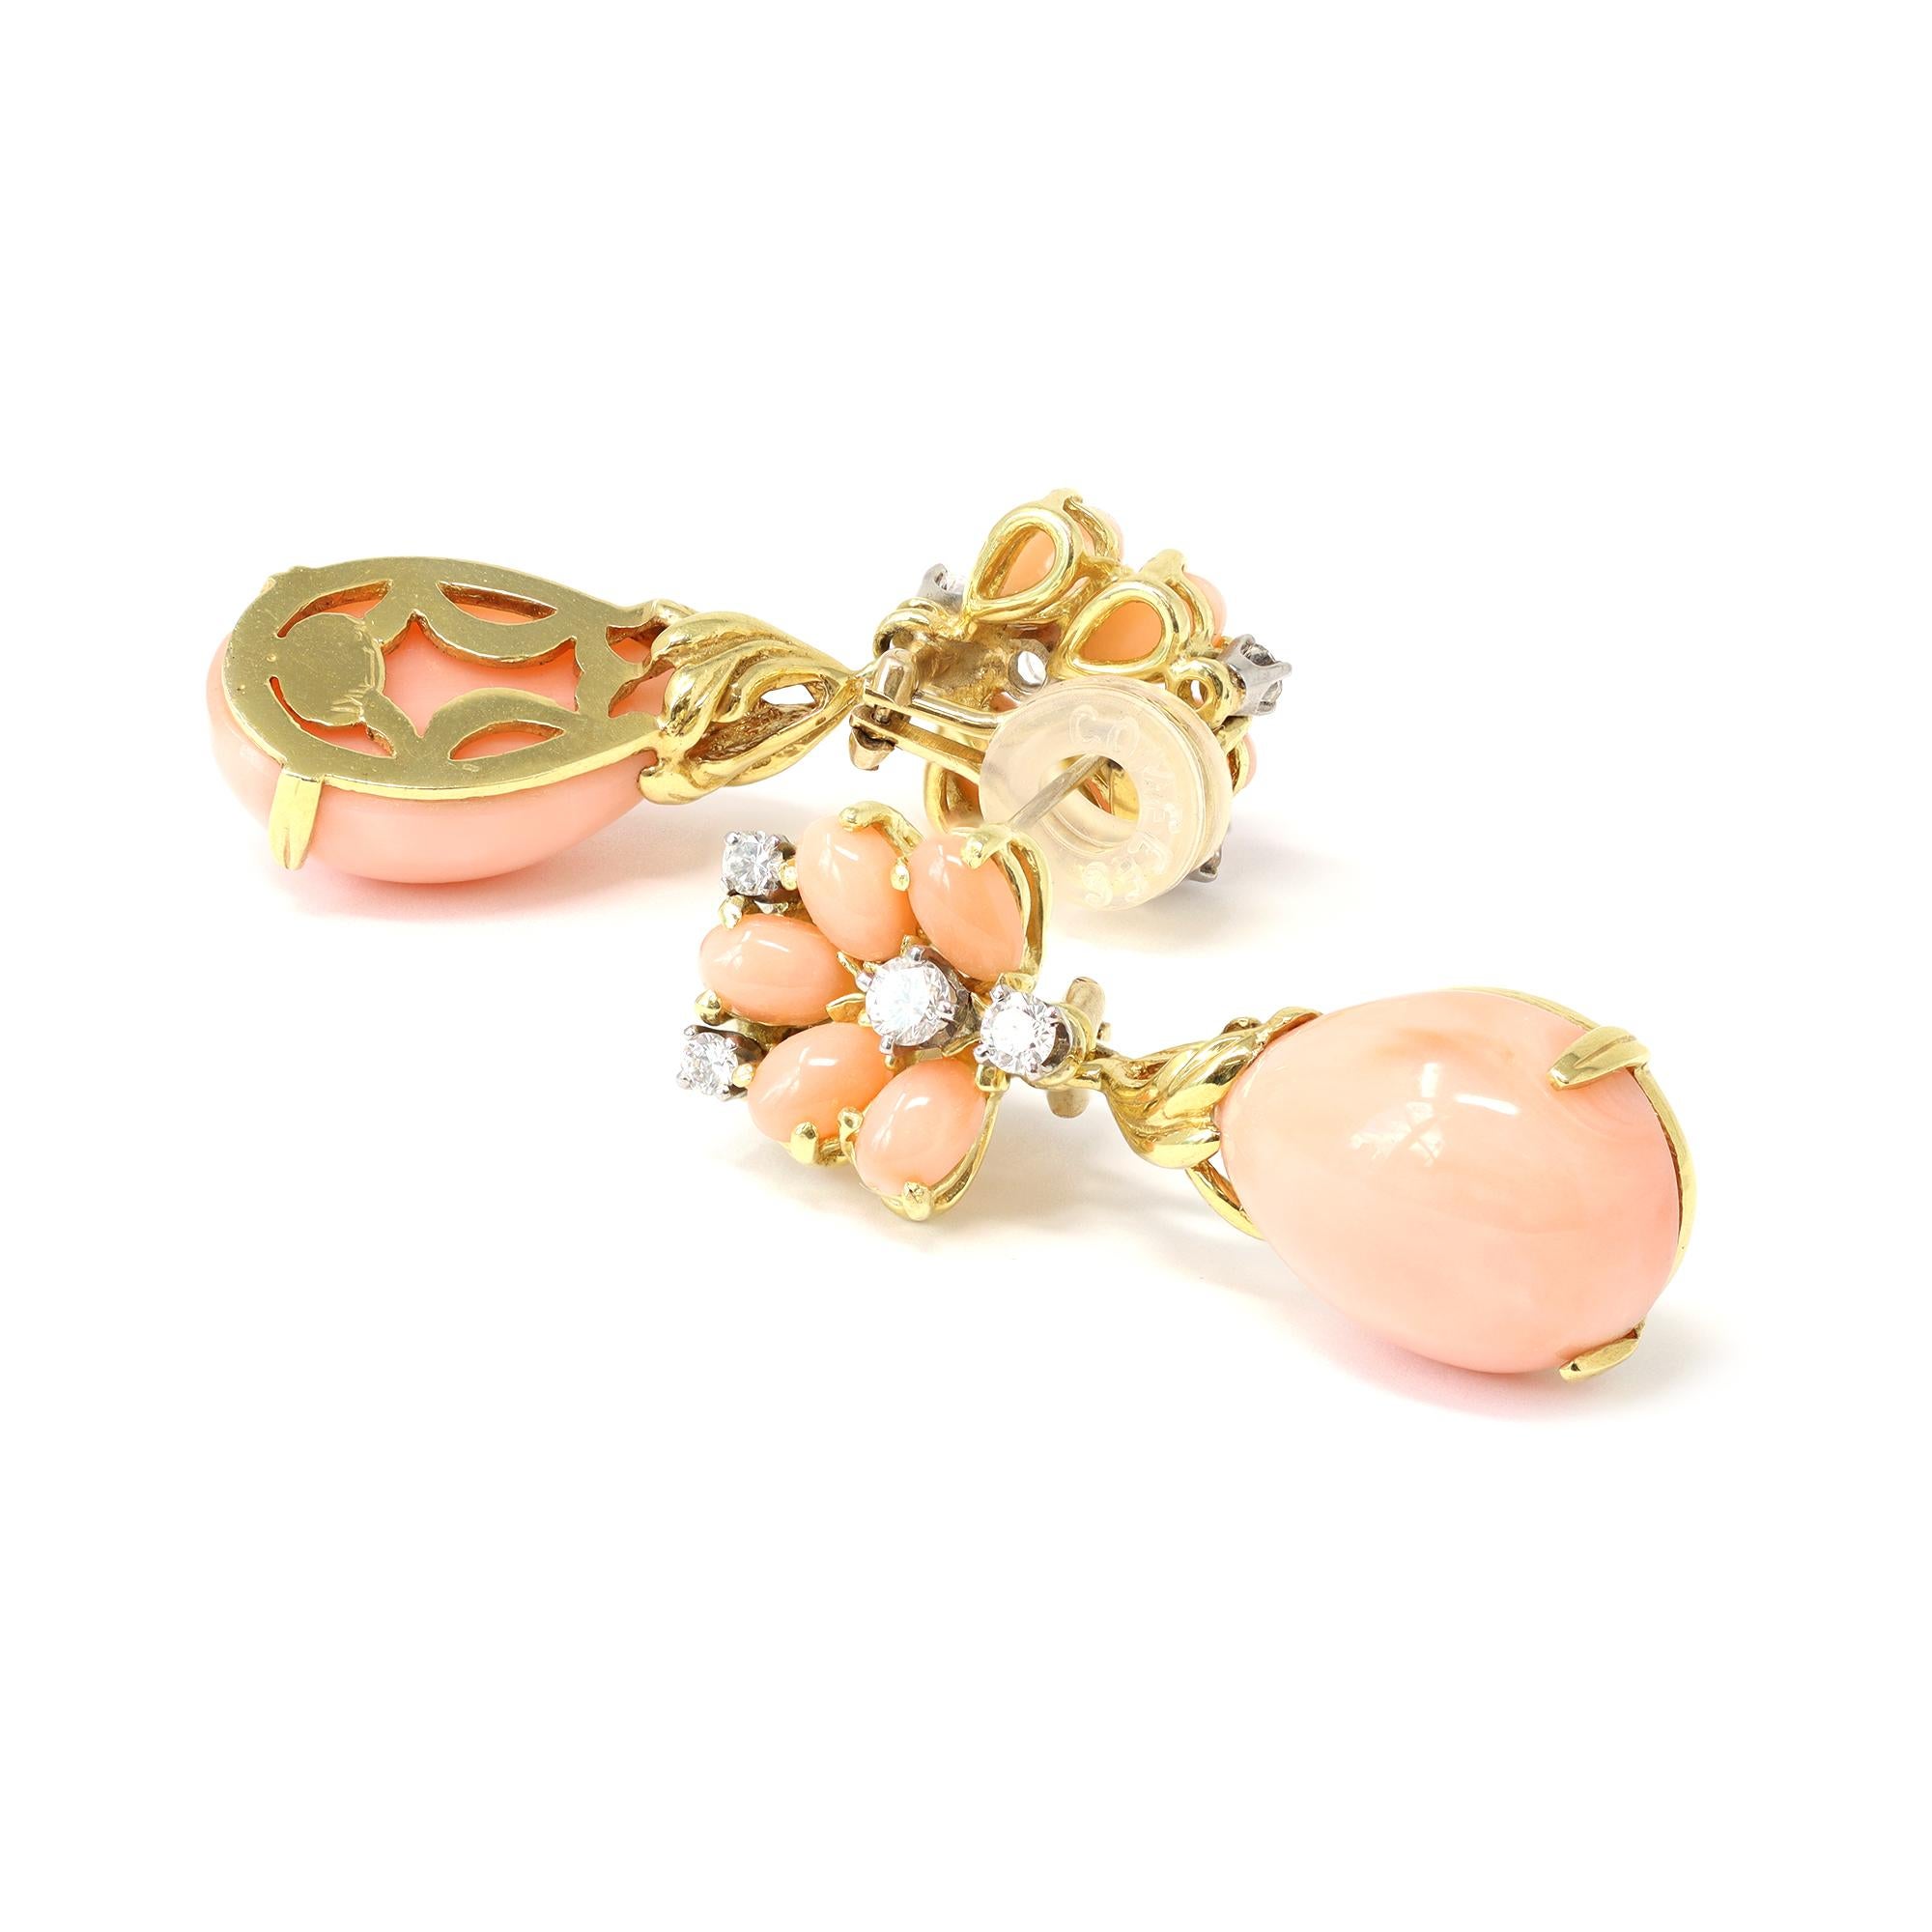 
A rare vintage pair of dangling earrings signed La Triomphe CA 1980. The earrings feature natural Angelskin coral drop pendants with intricate gold design. The coral pendants hang from a cluster of the same coral and diamond tops. The handmade